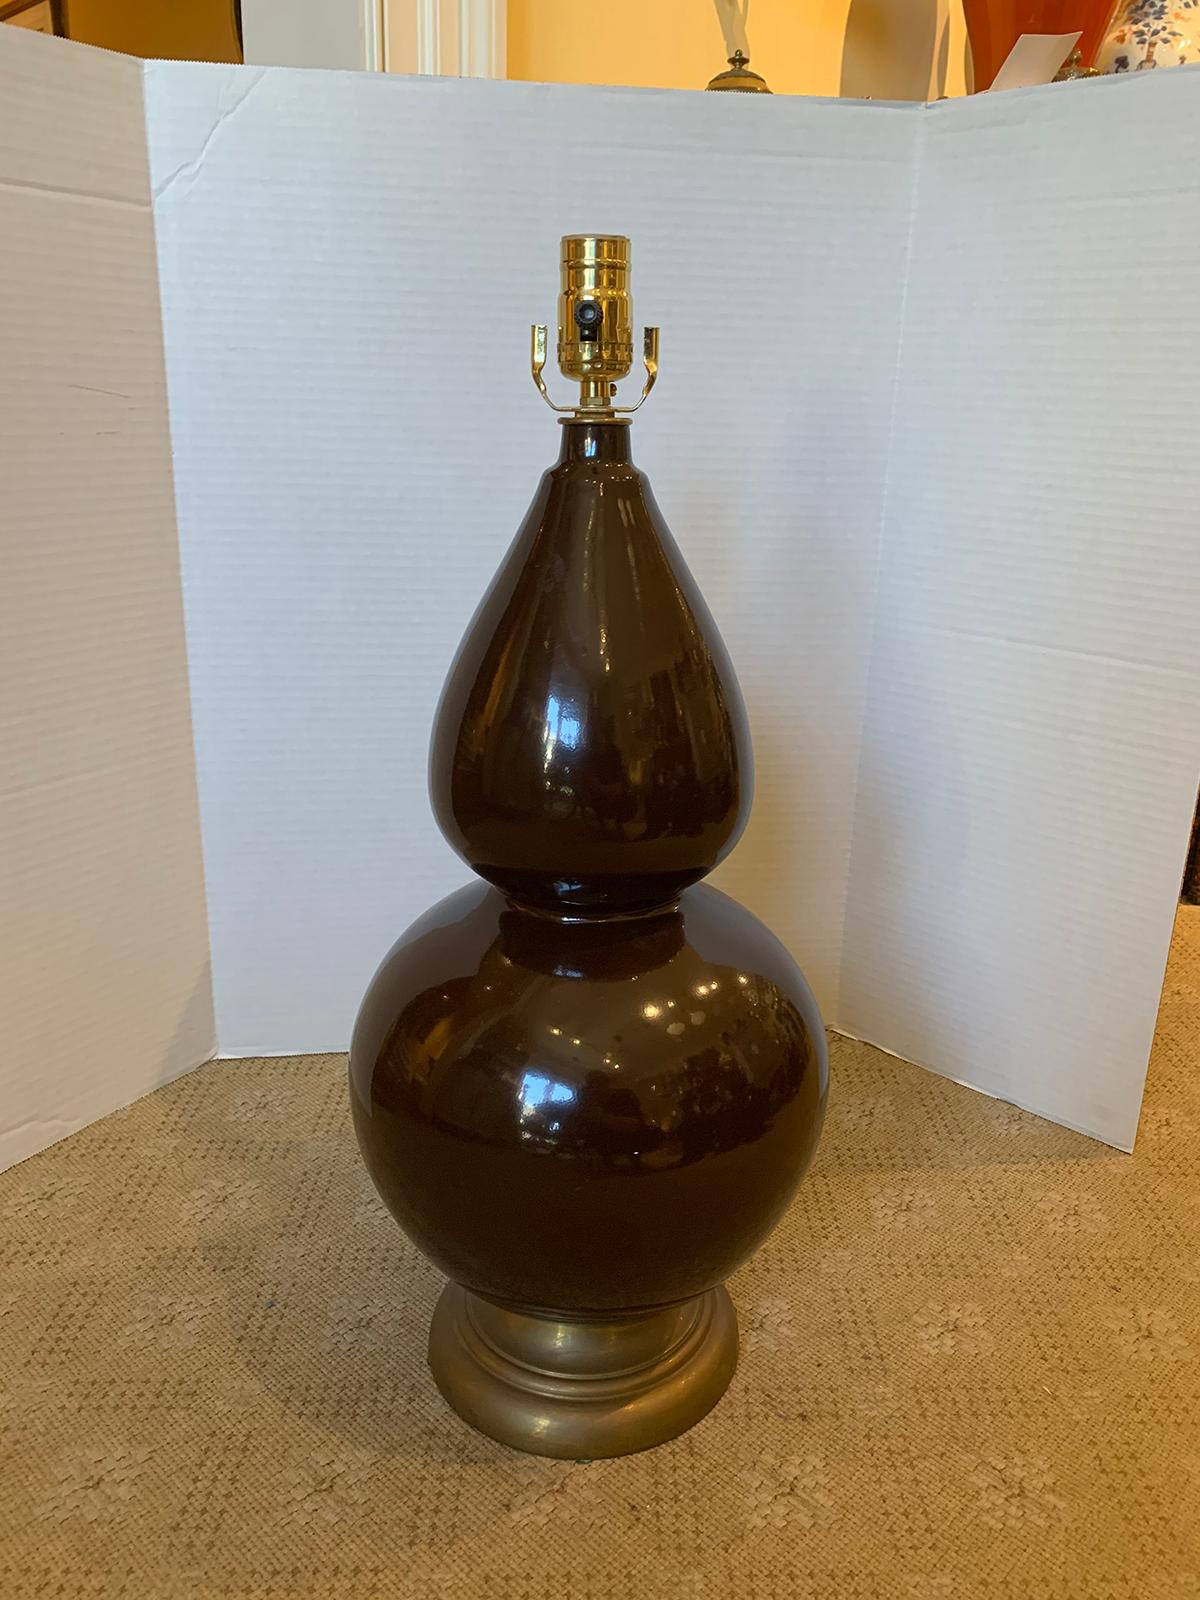 20th century double gourd chocolate brown colored glazed porcelain lamp
New wiring.